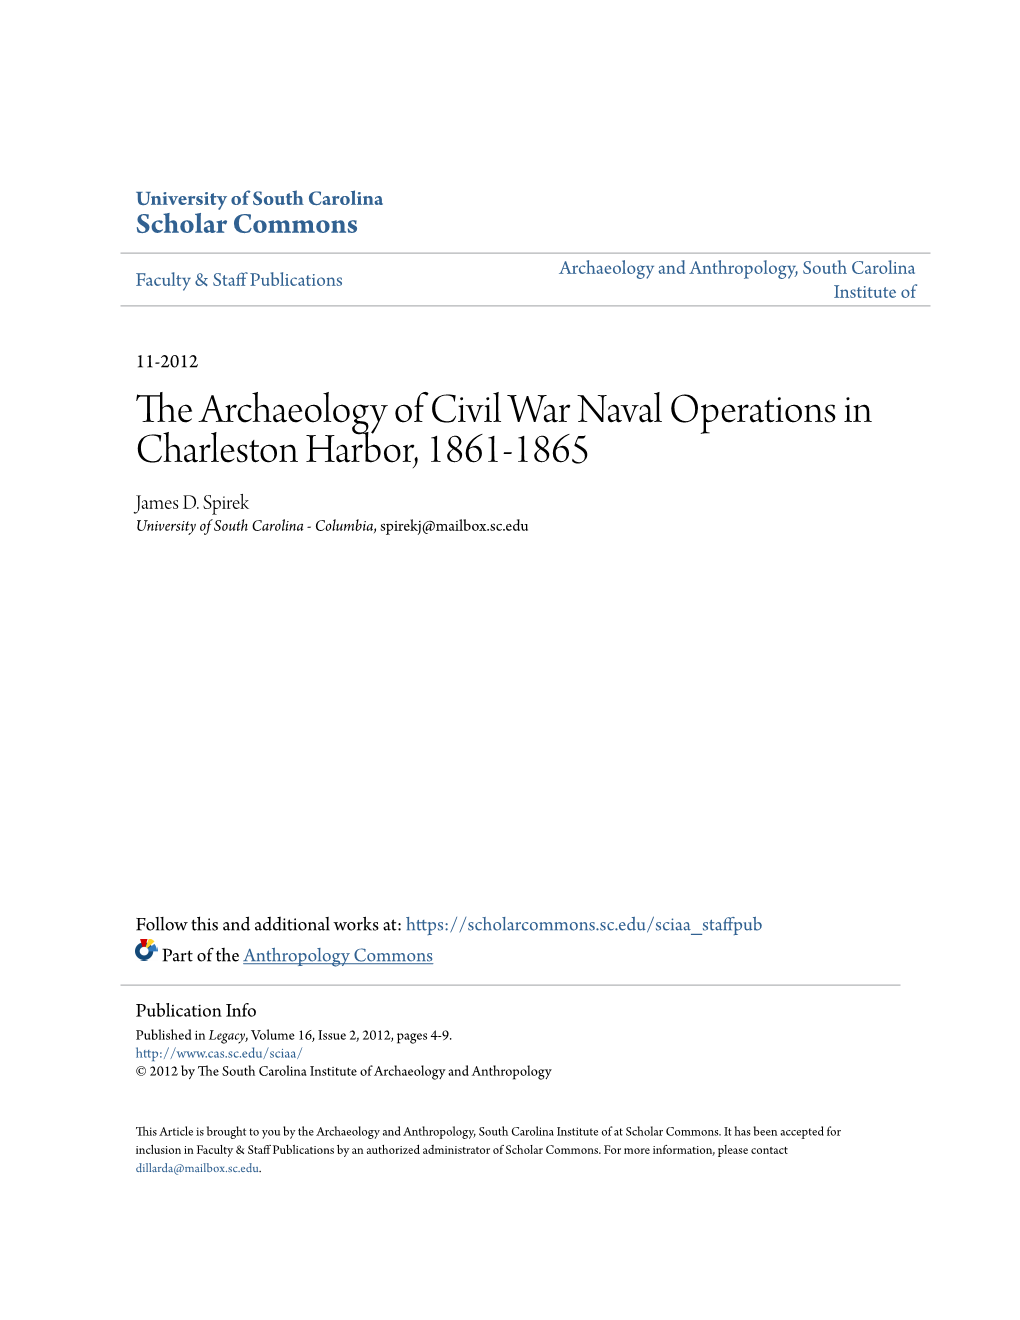 The Archaeology of Civil War Naval Operations in Charleston Harbor, 1861-1865 James D